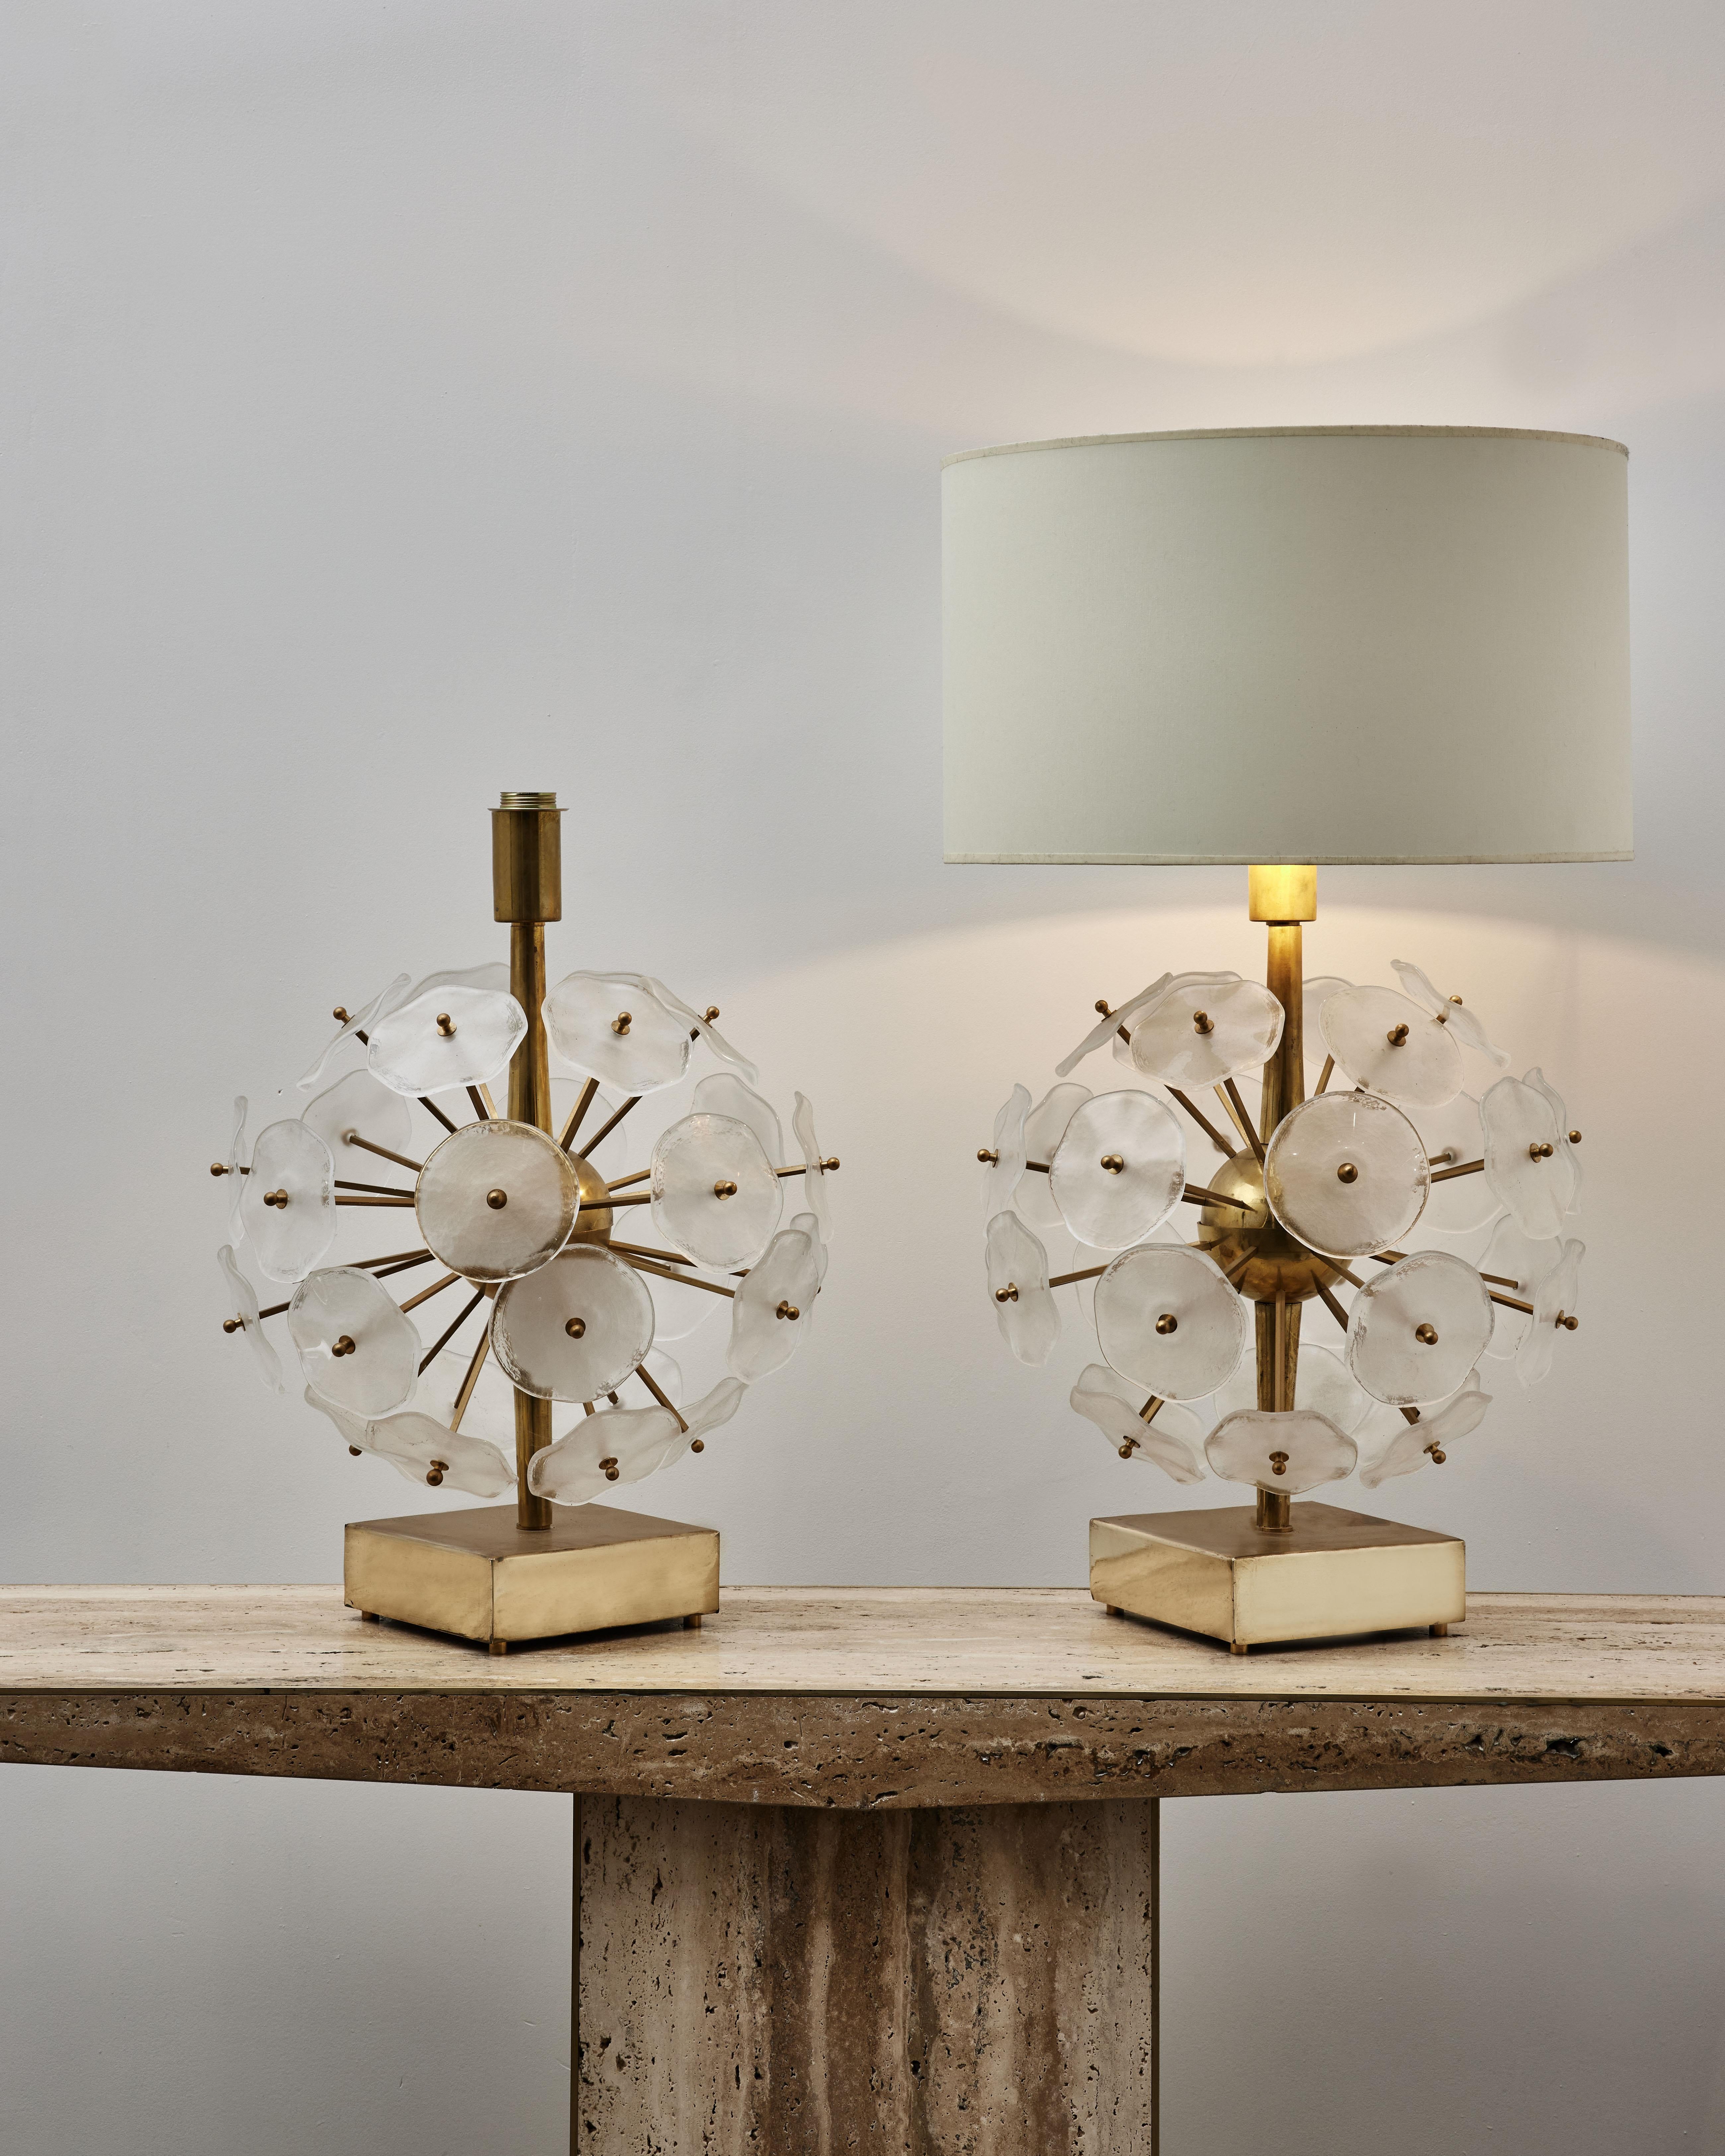 Pair of sputnik table lamps in brass with sculpted Murano glass plates.
Creation by Studio Glustin.

Price and dimensions without lampshade.